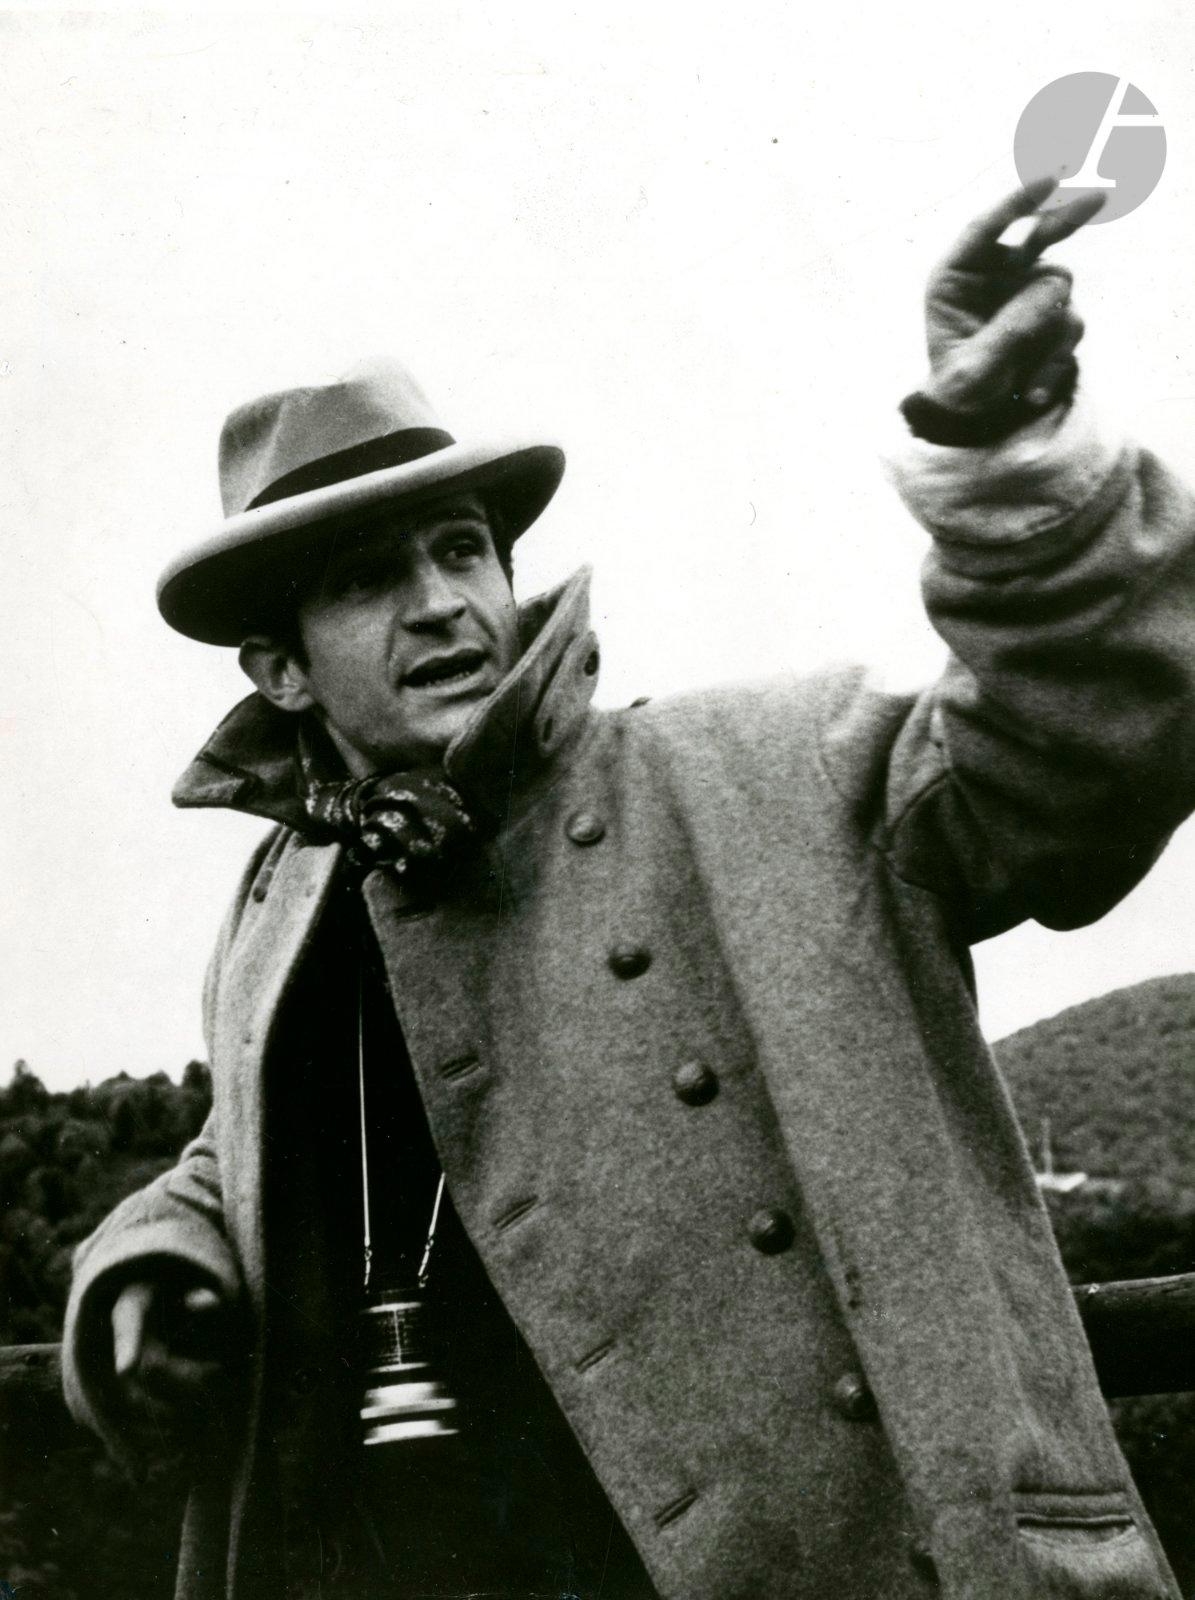 François Truffaut on the filming of Les 400 coups by Raymond Cauchetier, 1959